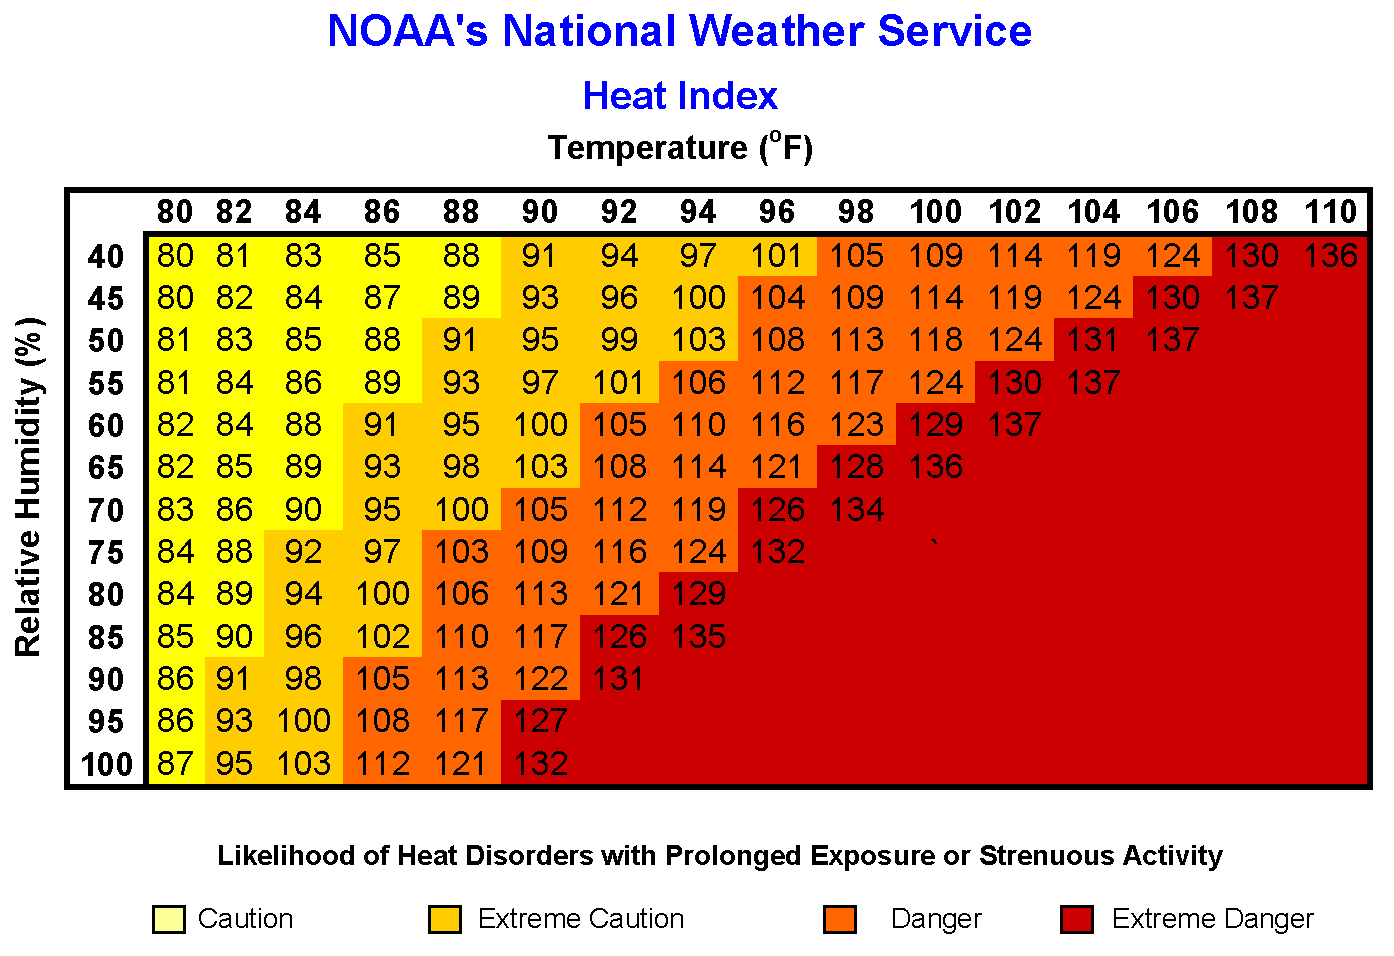 Heat Index combines the effects of high temperatures and humidity to show what the apparent temperature on the body feels like.  Image: NWS